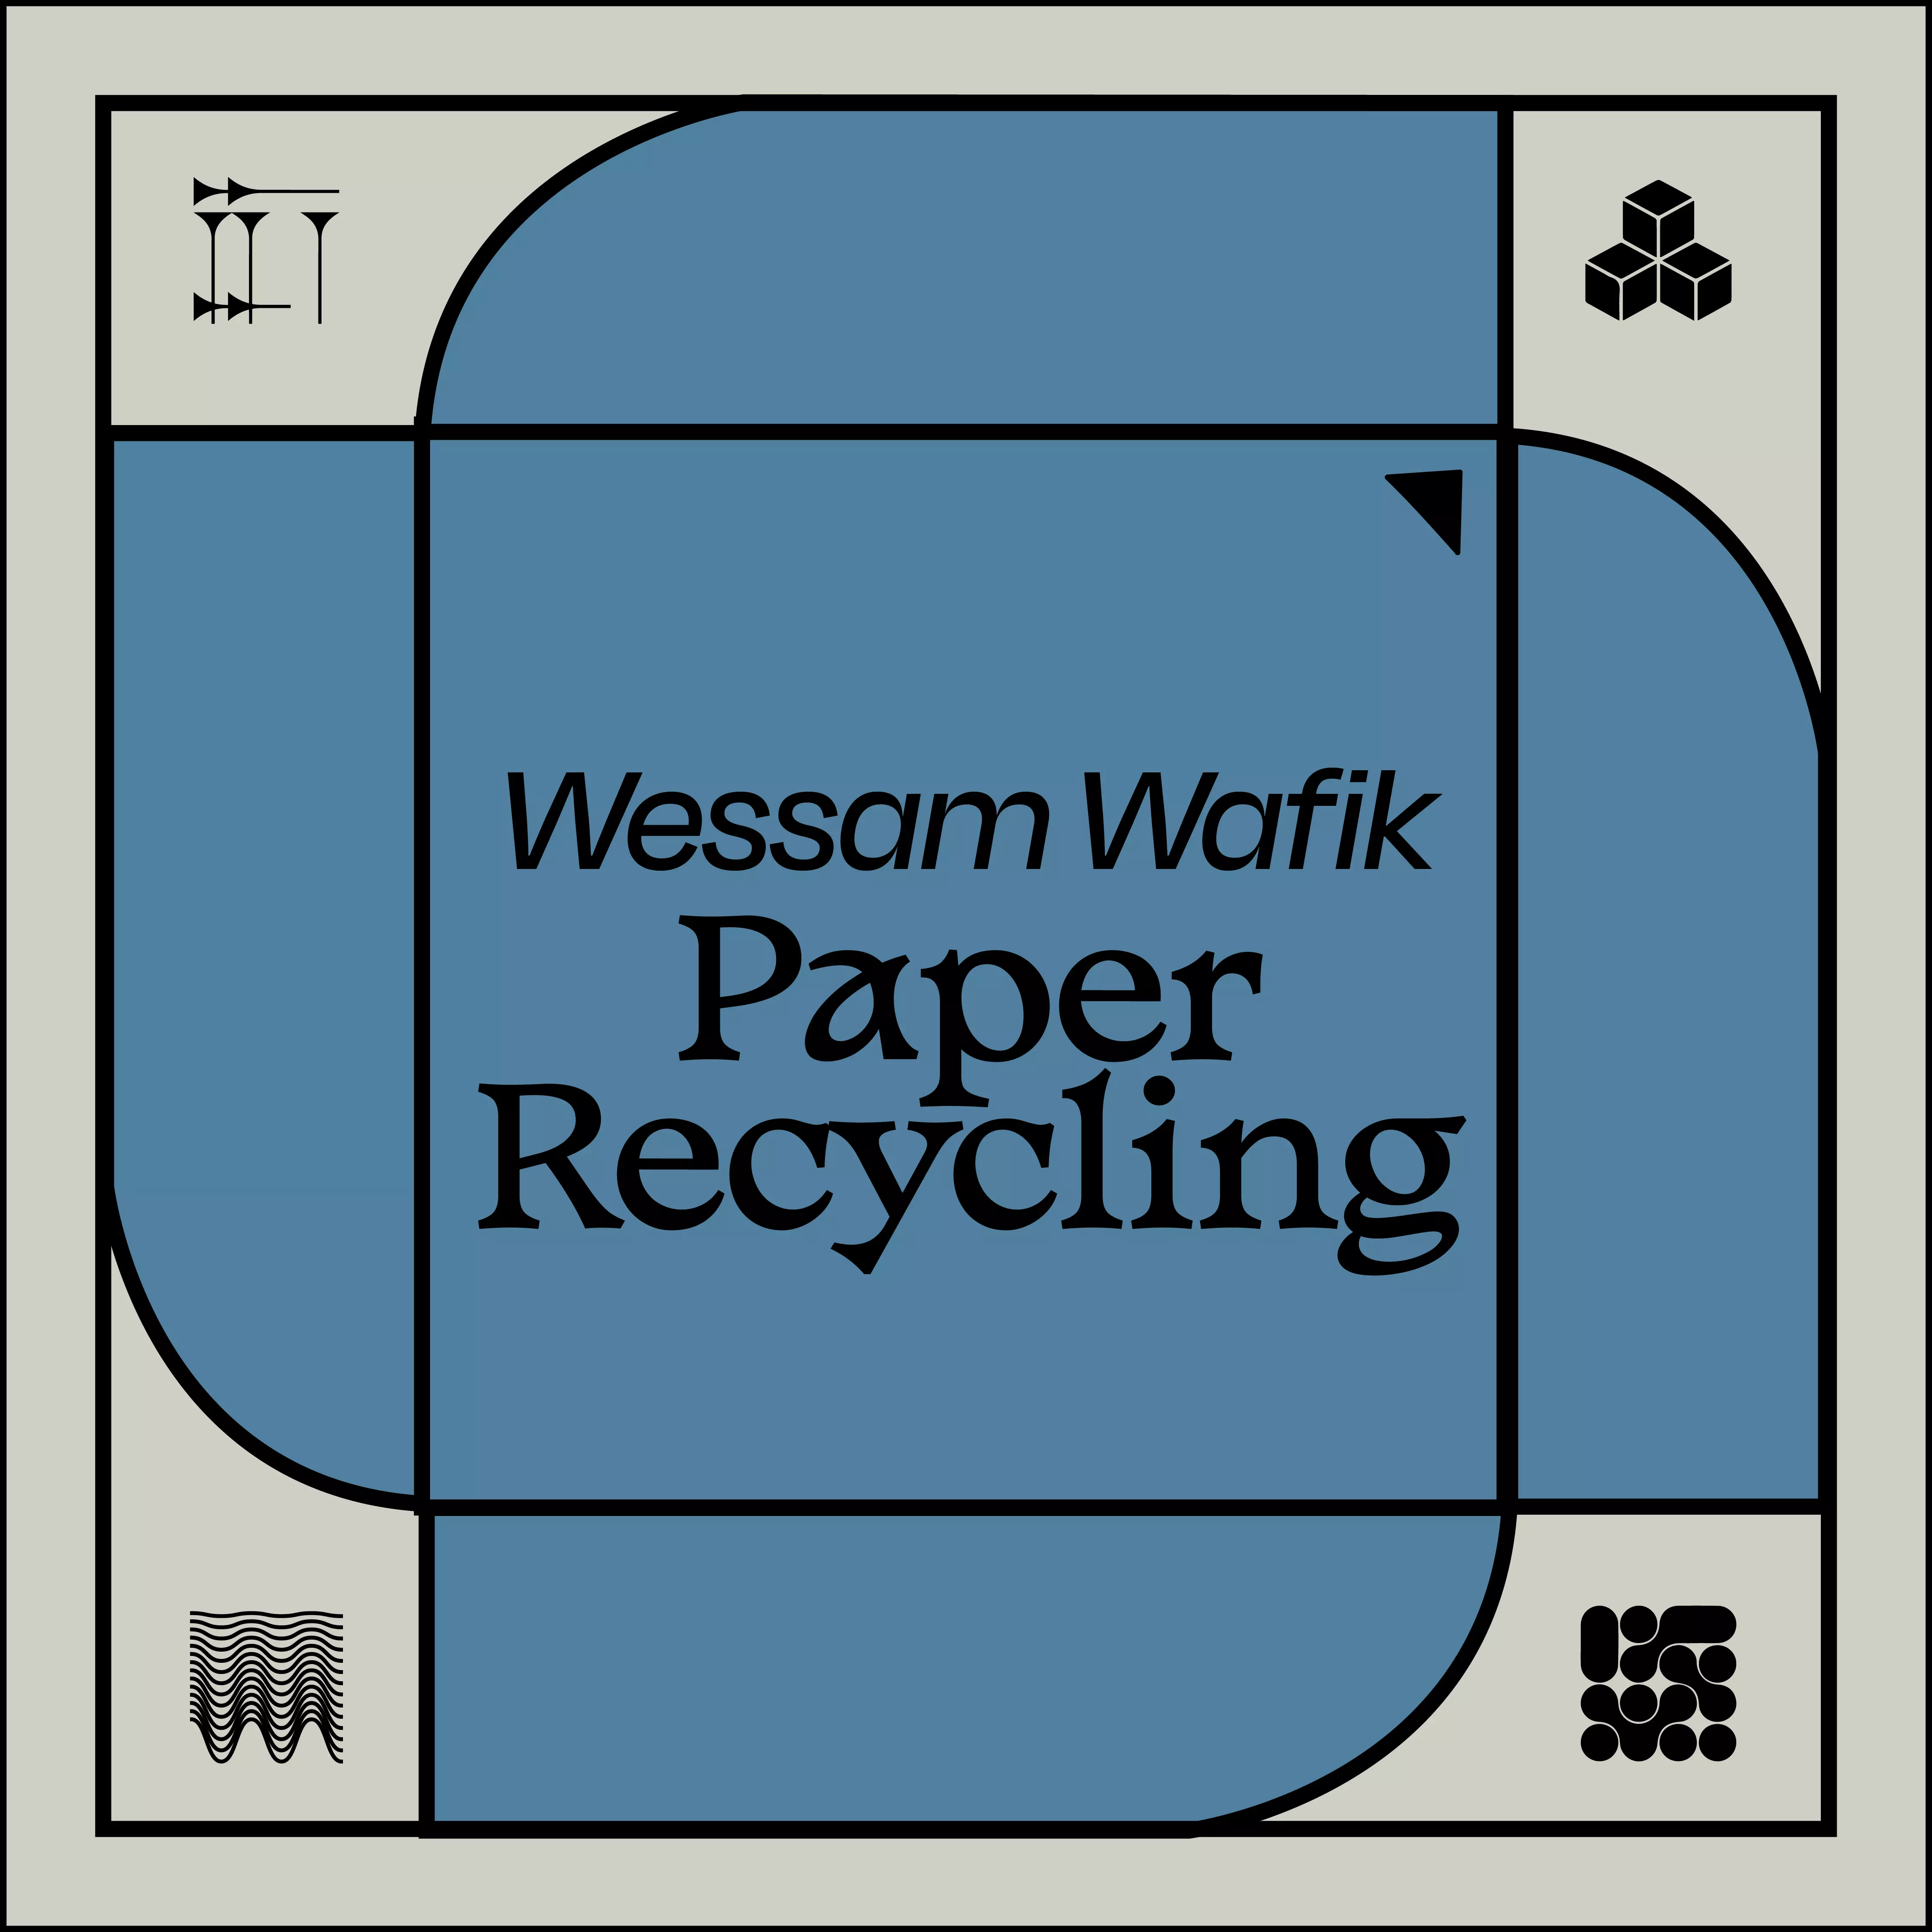 <p>1 Day Paper Recycling with Wessam Wafik</p>